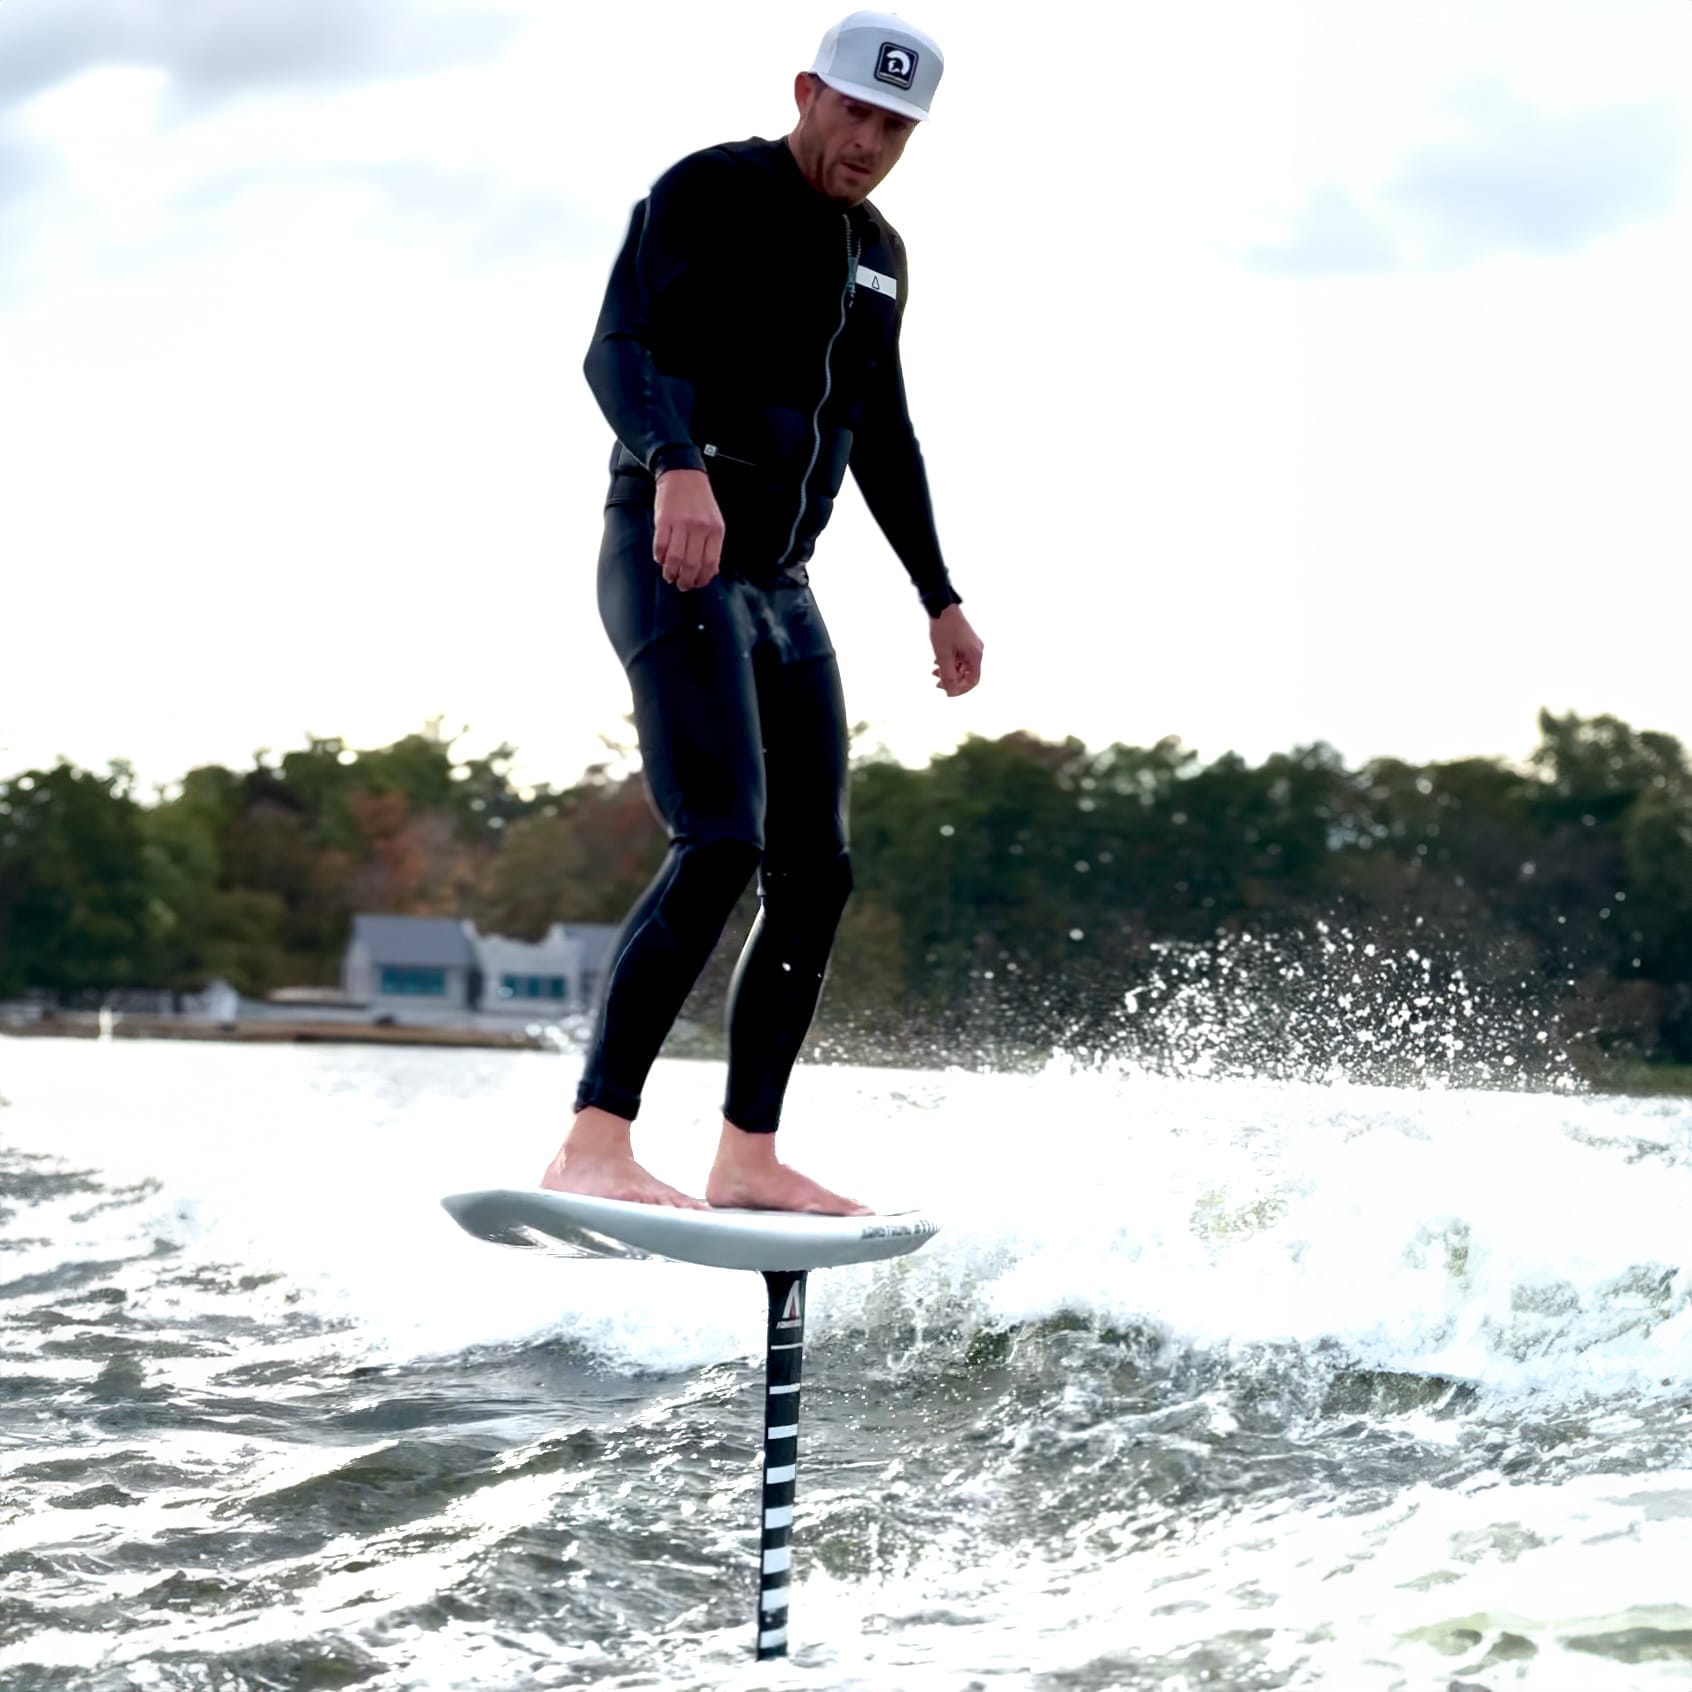 A man standing on top of a wakeboard in the water.